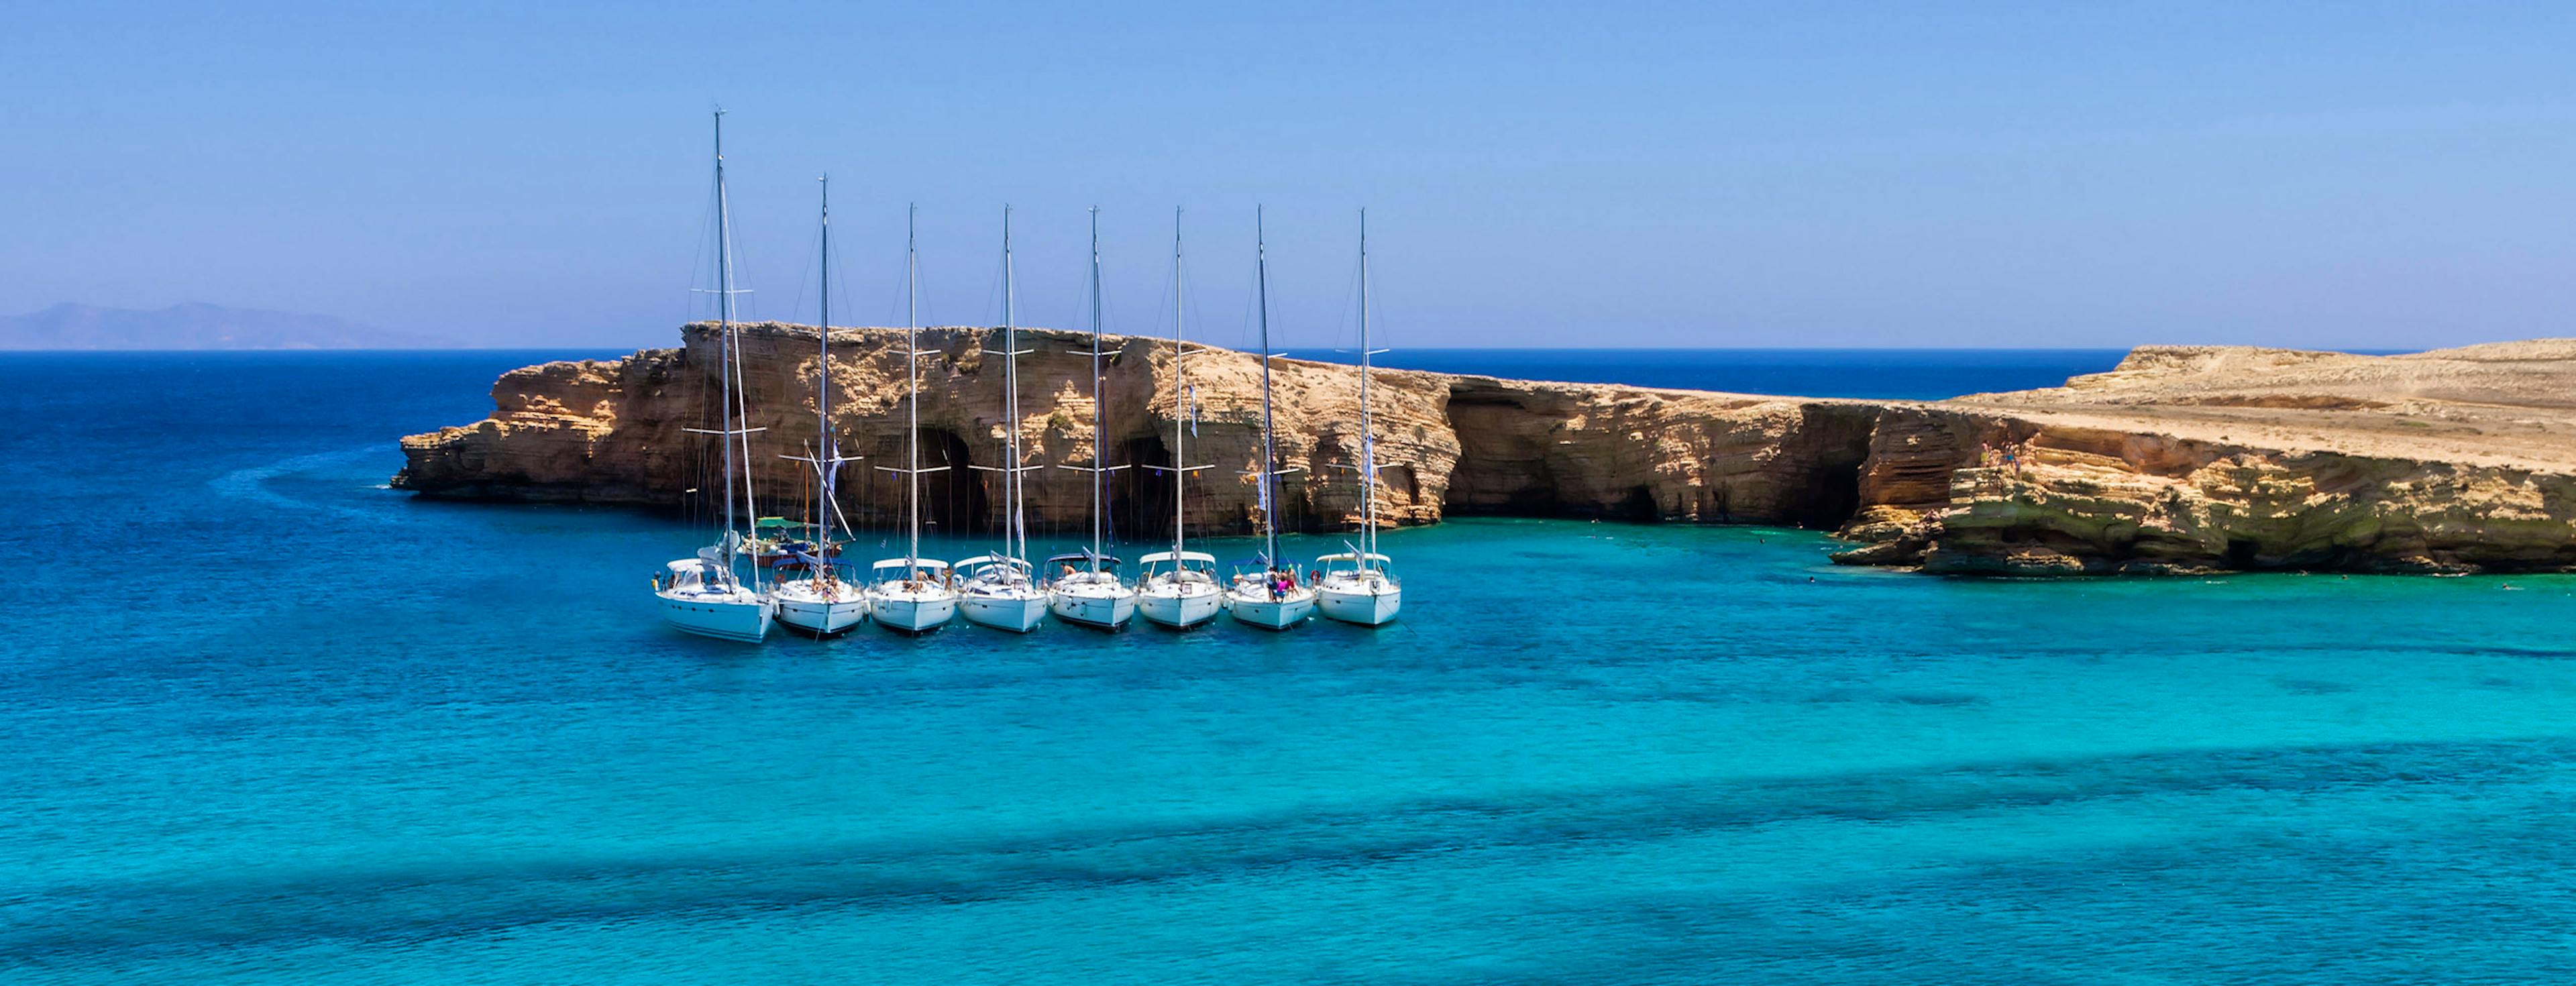 Rent a Boat in the Cyclades